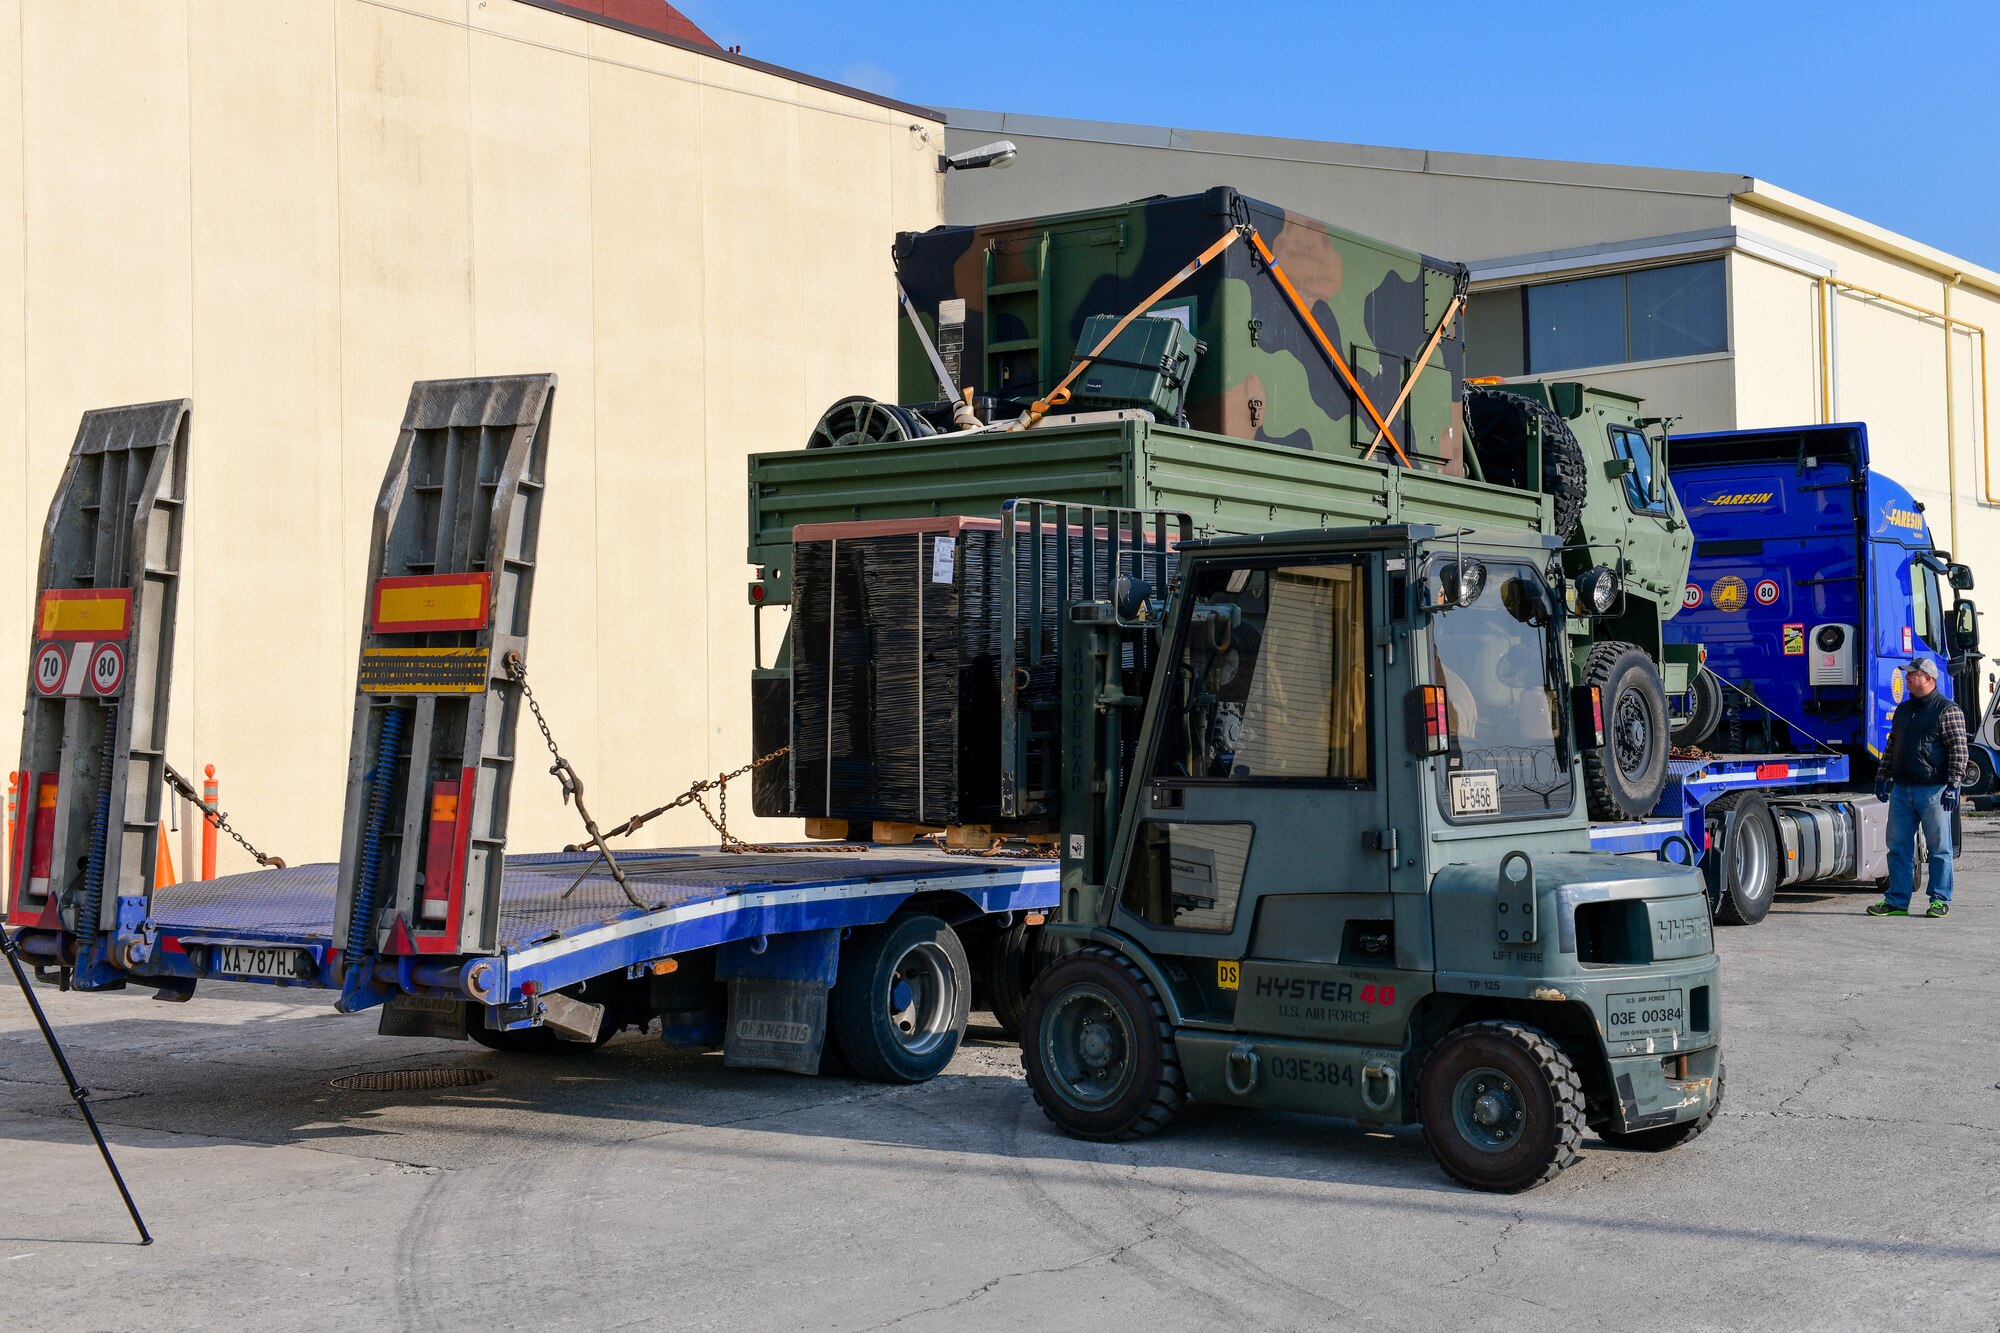 A cargo pallet is loaded onto a trailer at Aviano Air Base, Italy, March 4, 2022. The 31st Fighter Wing’s multi-capable Airmen and equipment stand ready to support U.S. Air Forces in Europe and its NATO allies in support of ongoing operations currently in Europe. (U.S. Air Force photo by Senior Airman Brooke Moeder)